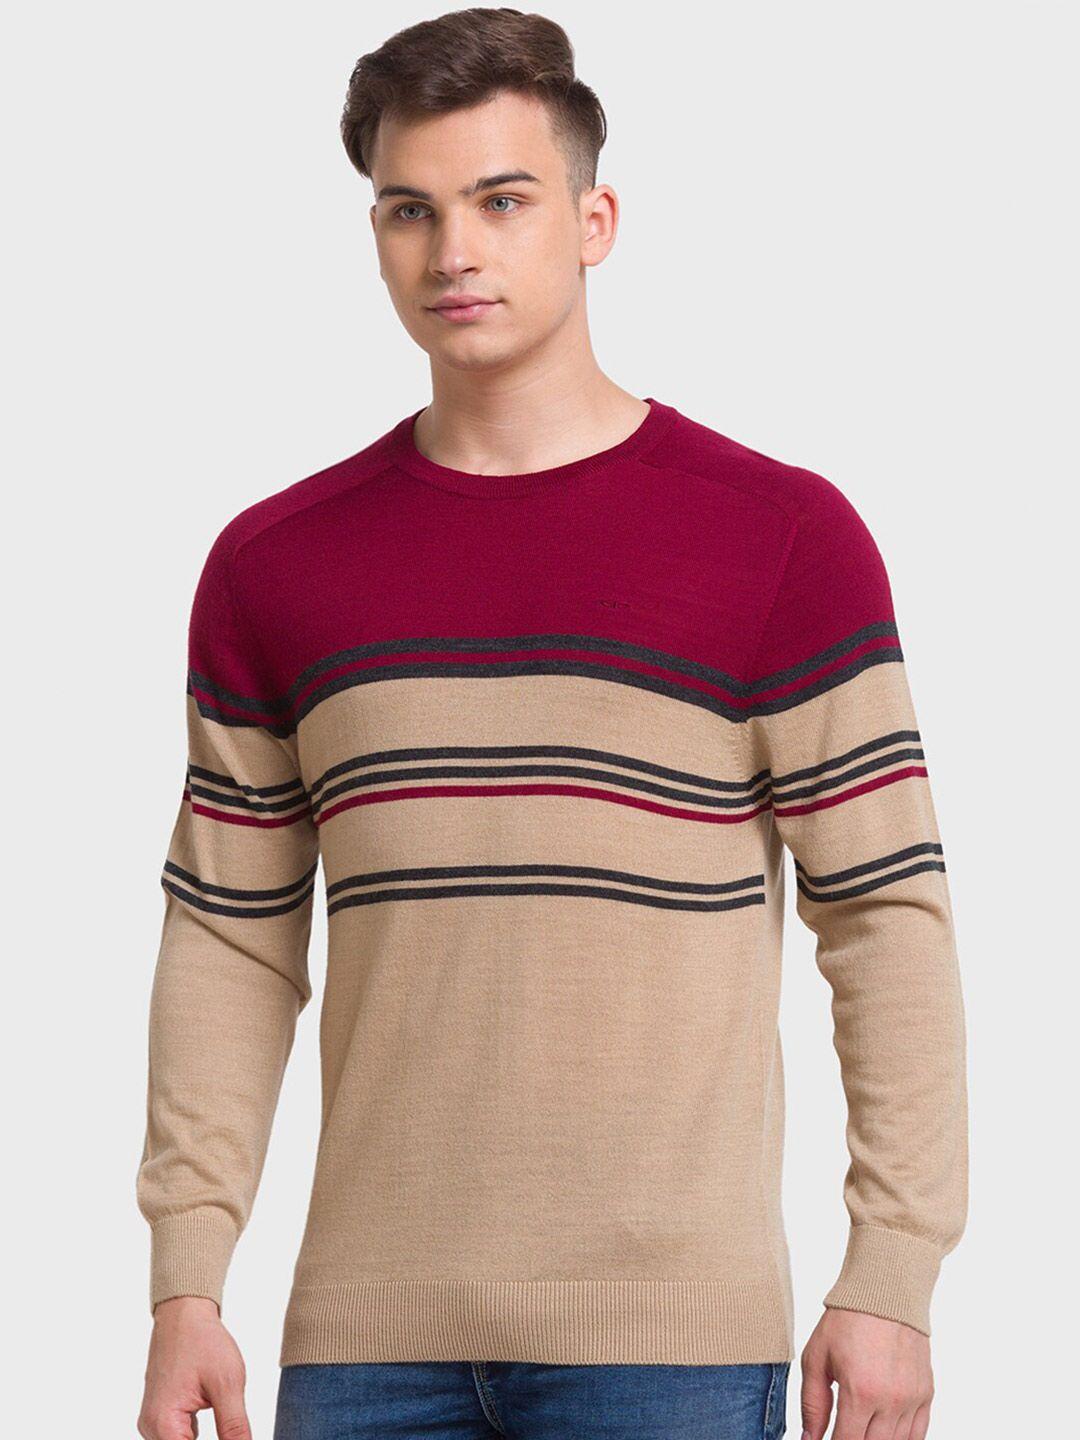 ColorPlus Tailored Fit Striped Woollen Pullover Sweater